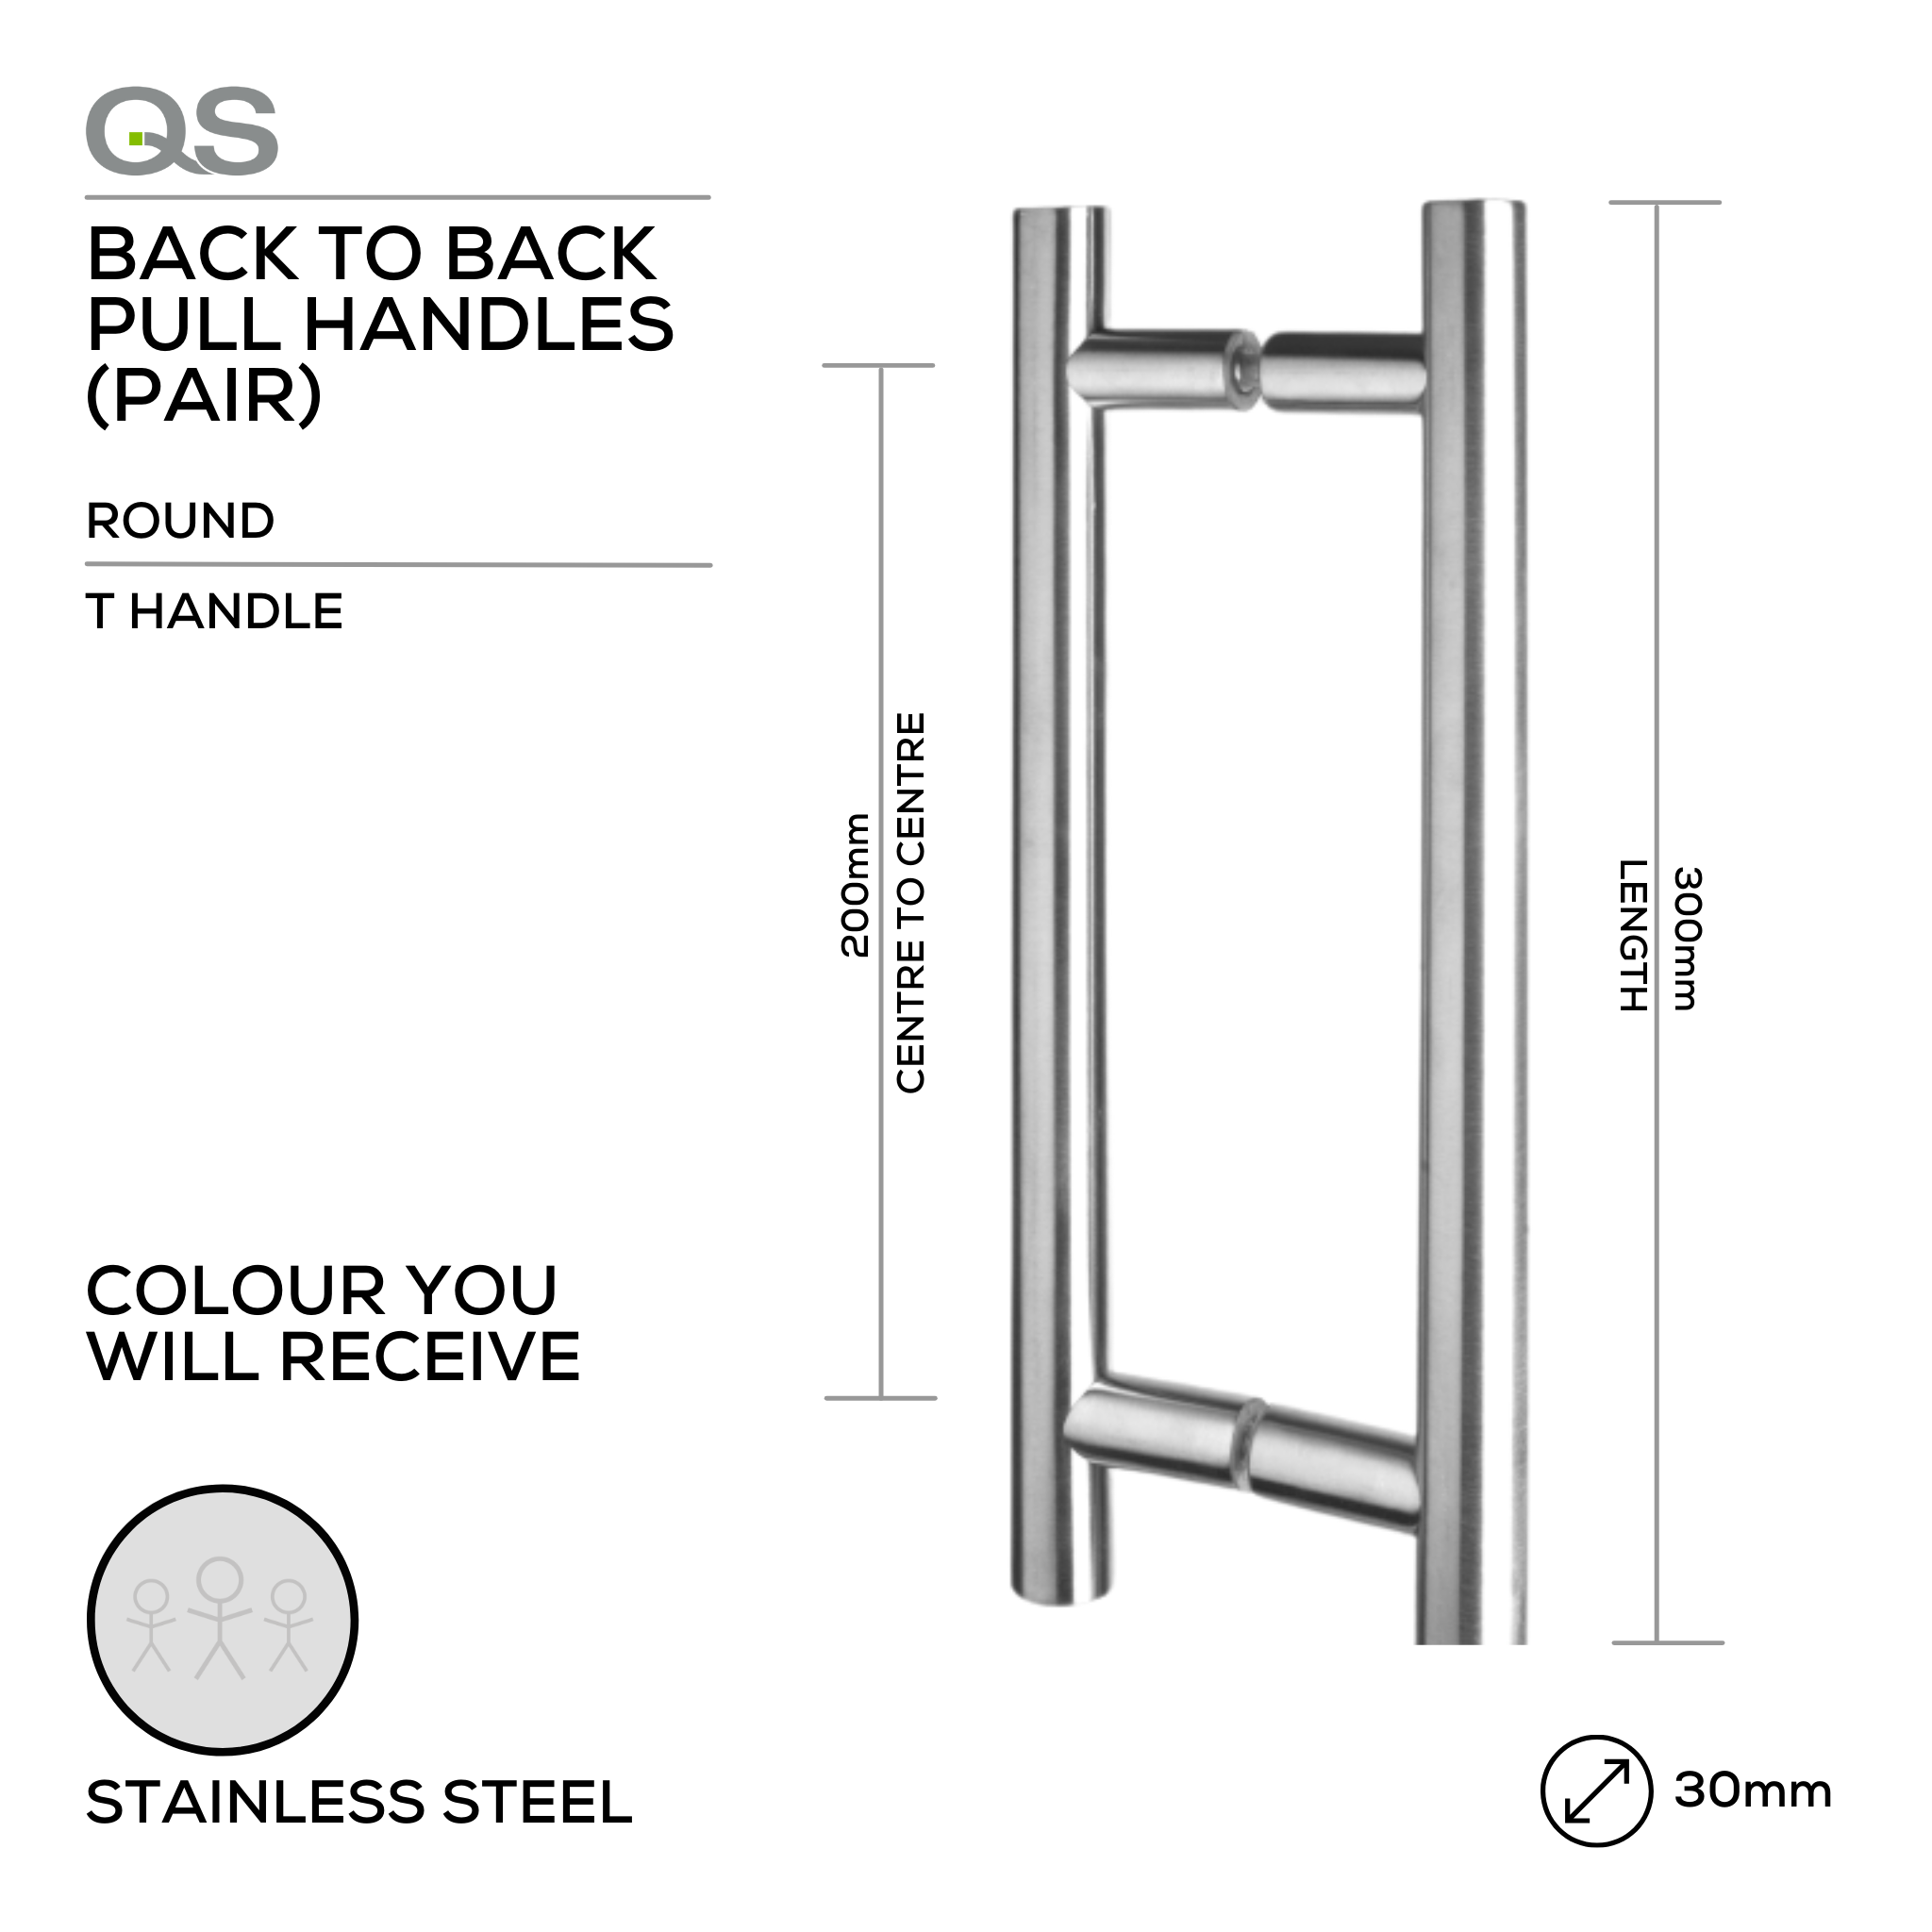 QS2506 T Handle, Pull Handle, Round, T Handle, BTB, 30mm (Ø) x 300mm (l) x 200mm (ctc), Stainless Steel, QS